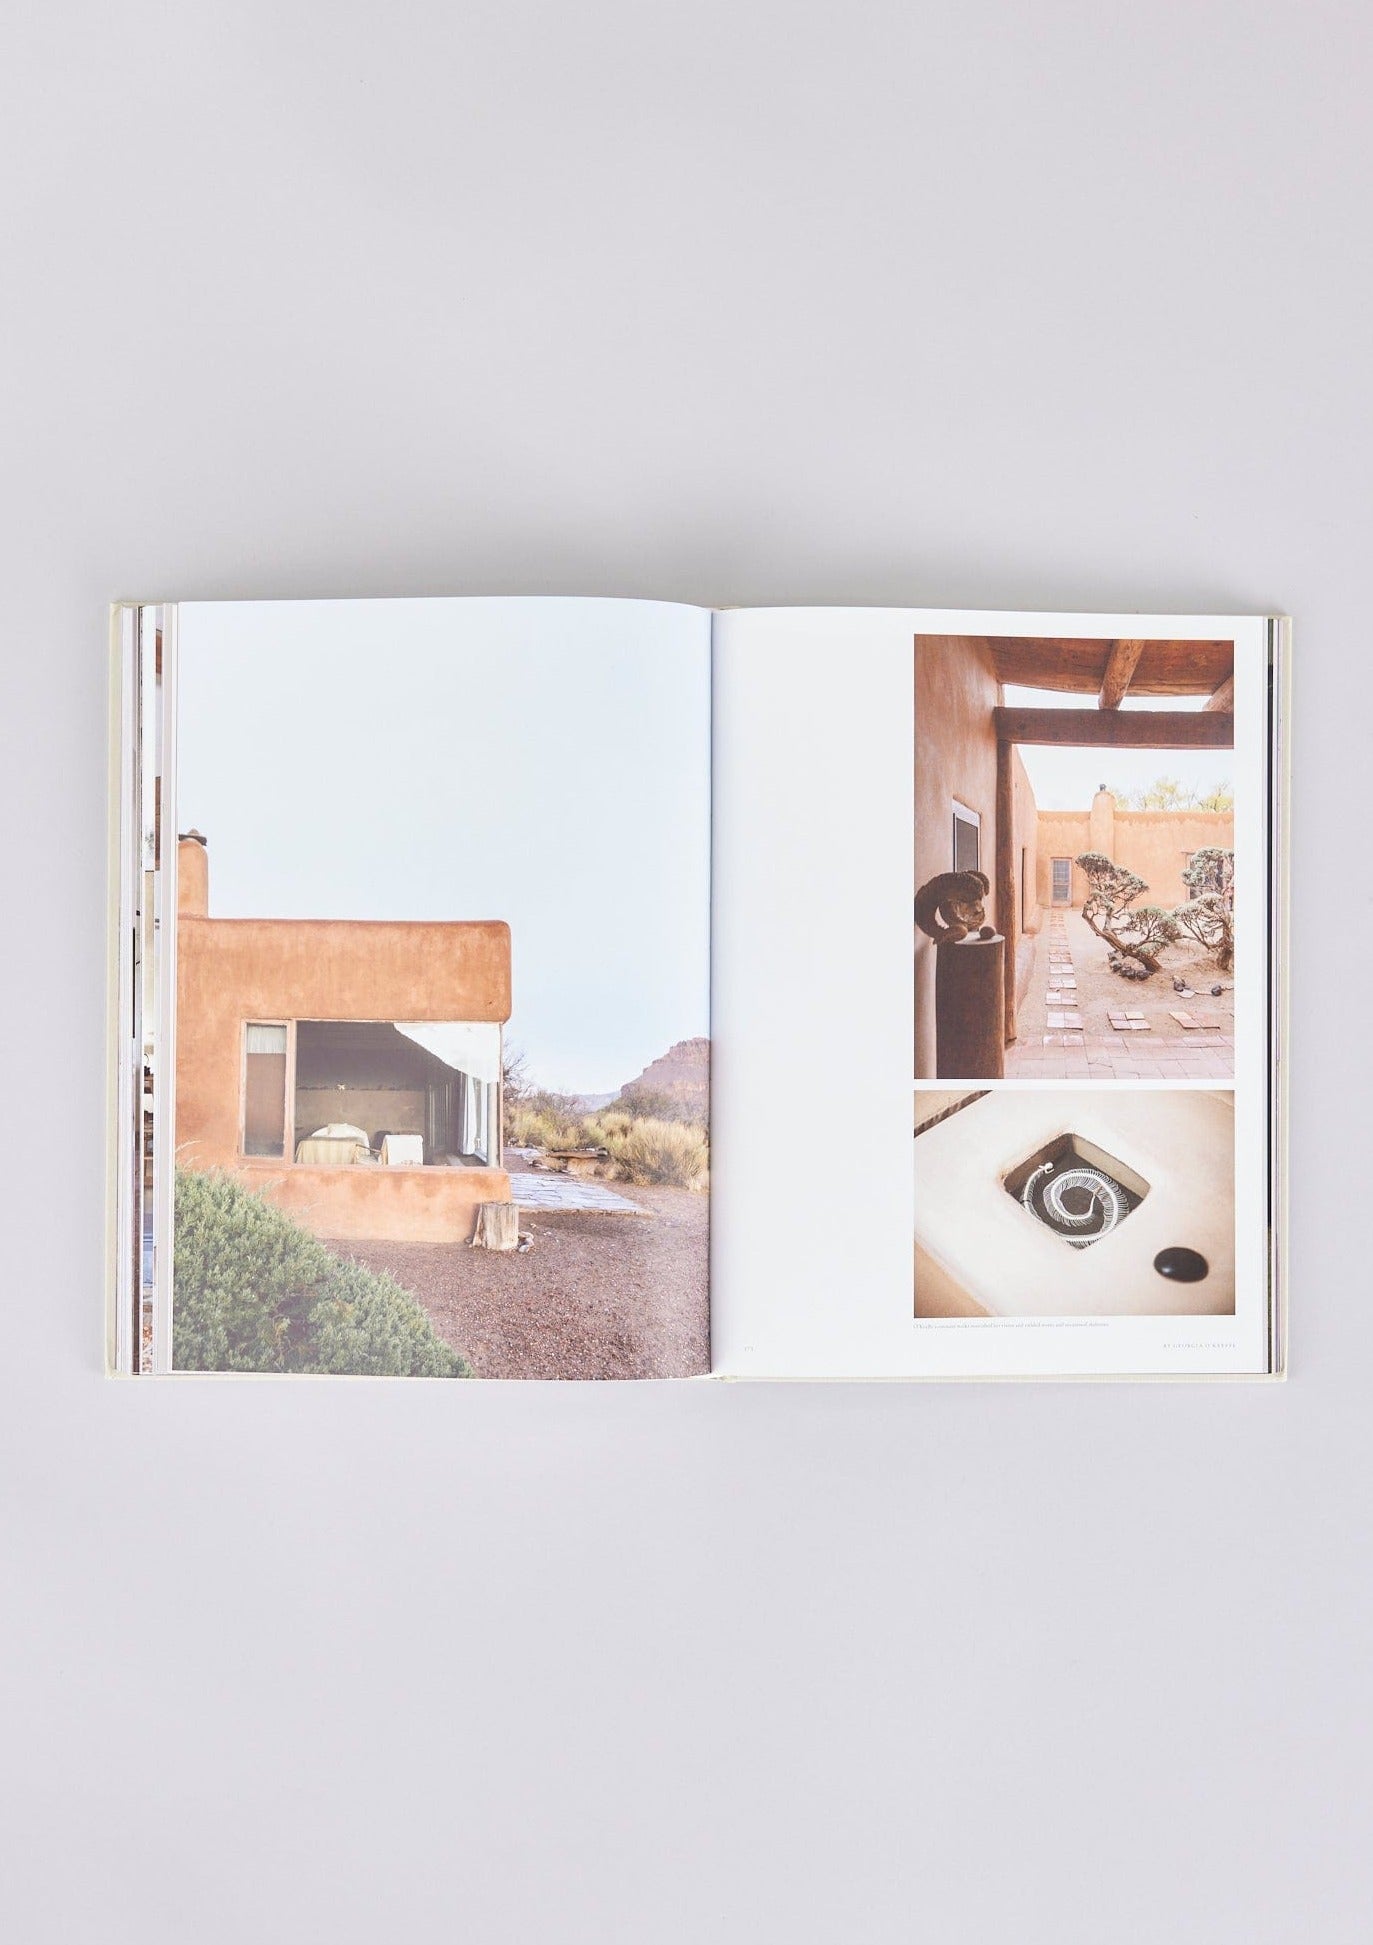 Living In-Architectural Book at Afloral